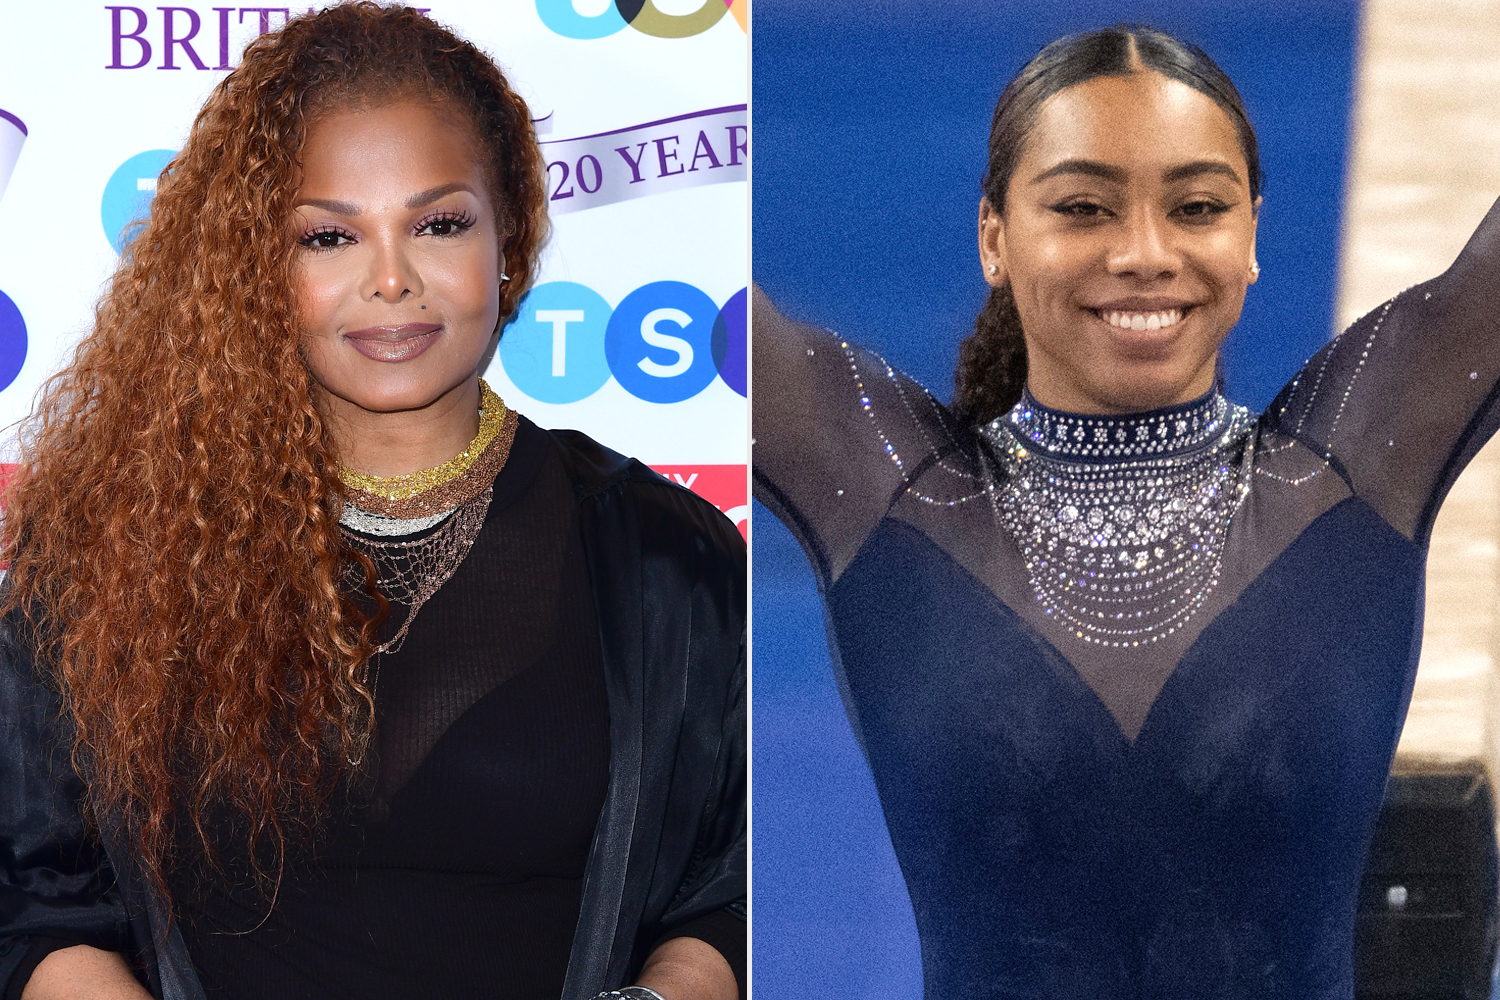 Janet Jackson Surprises College Gymnast With a Call After Her Performance